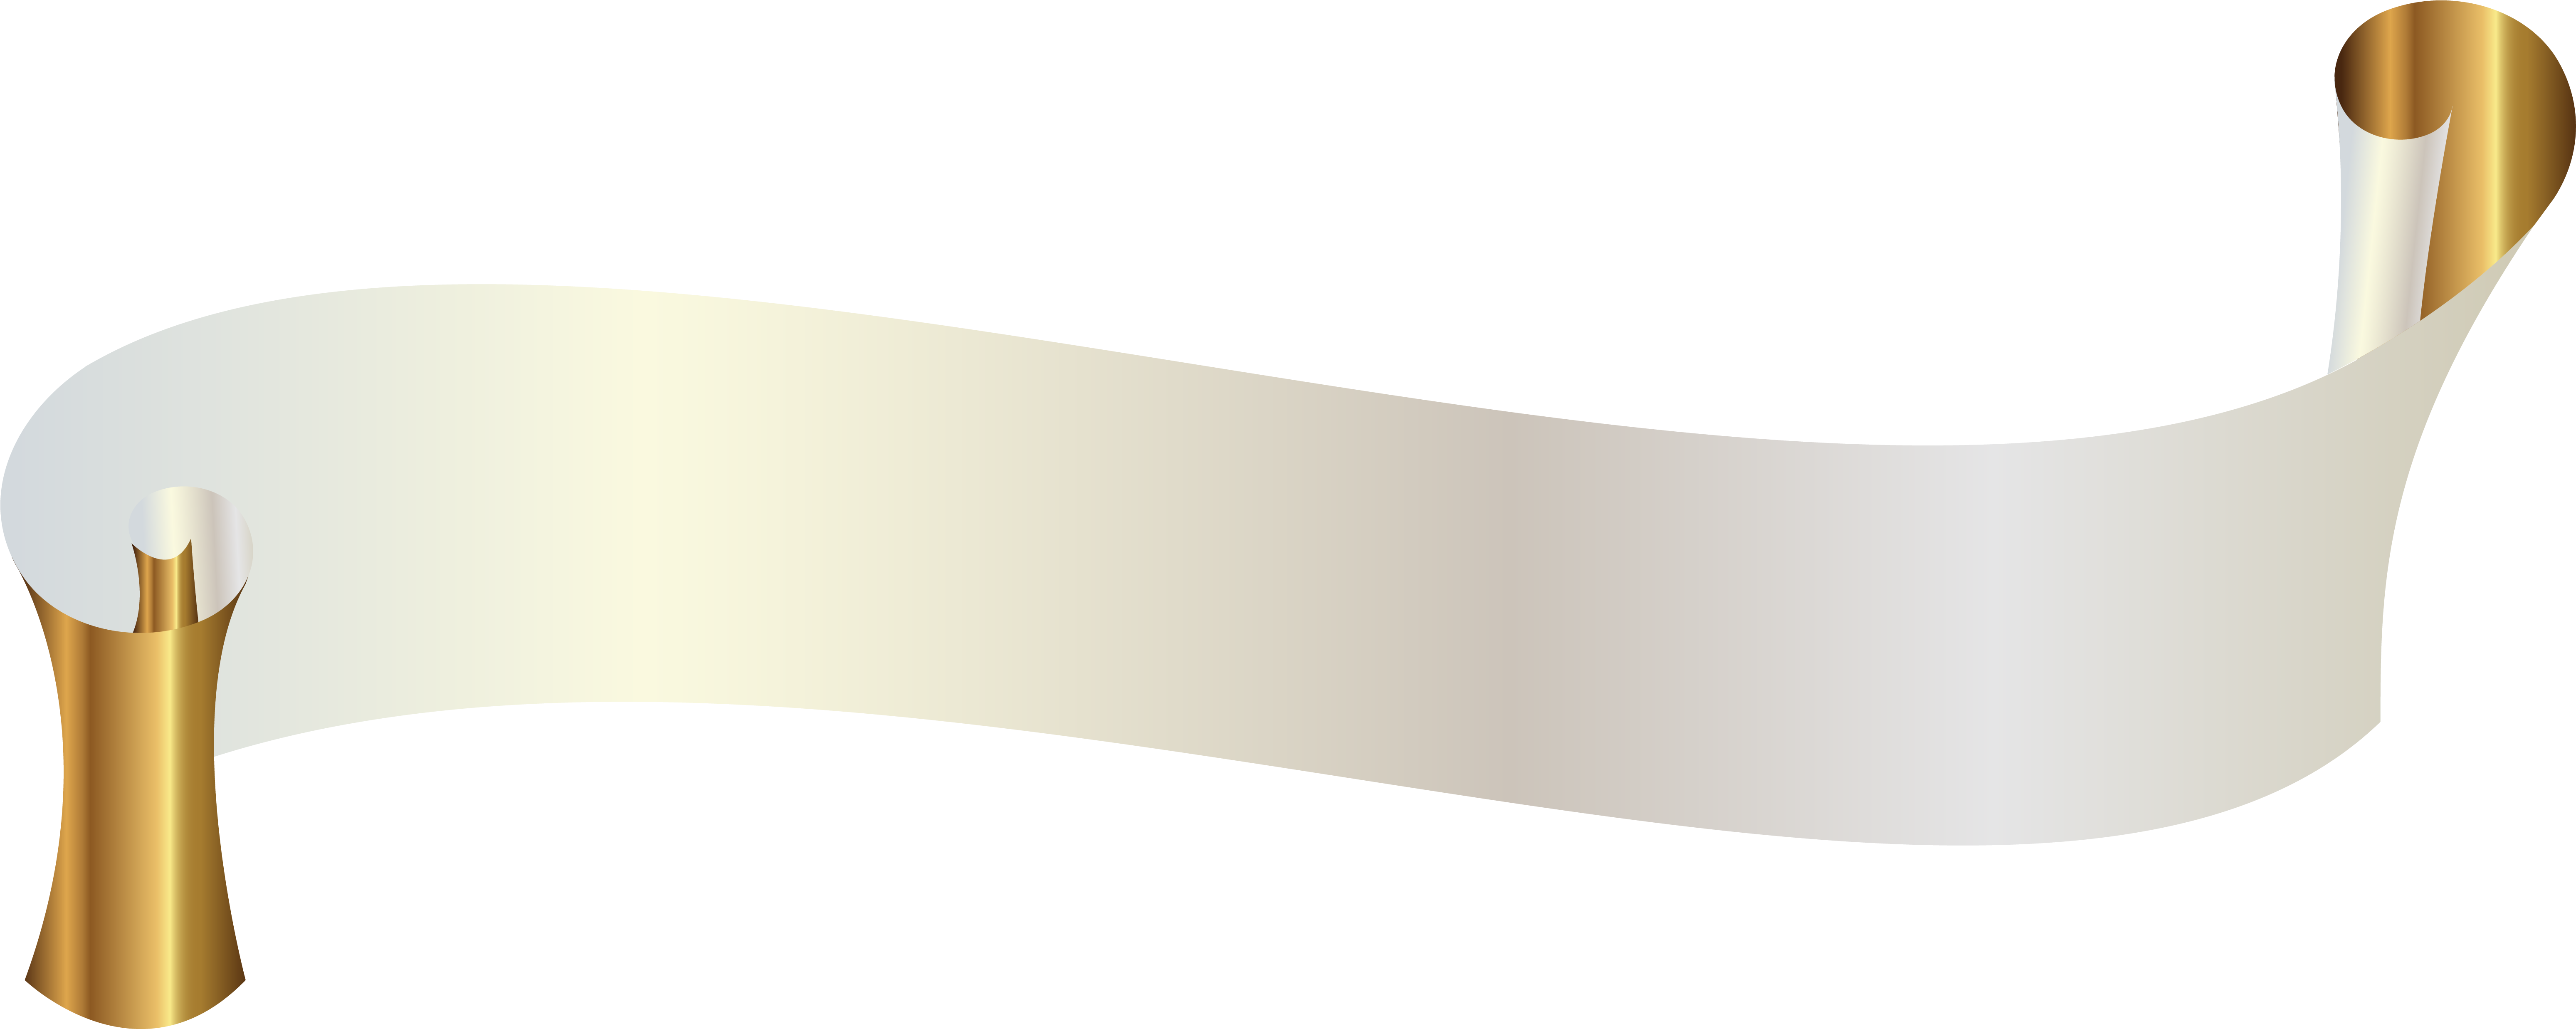 Gold Banner Png 6195 X 2474